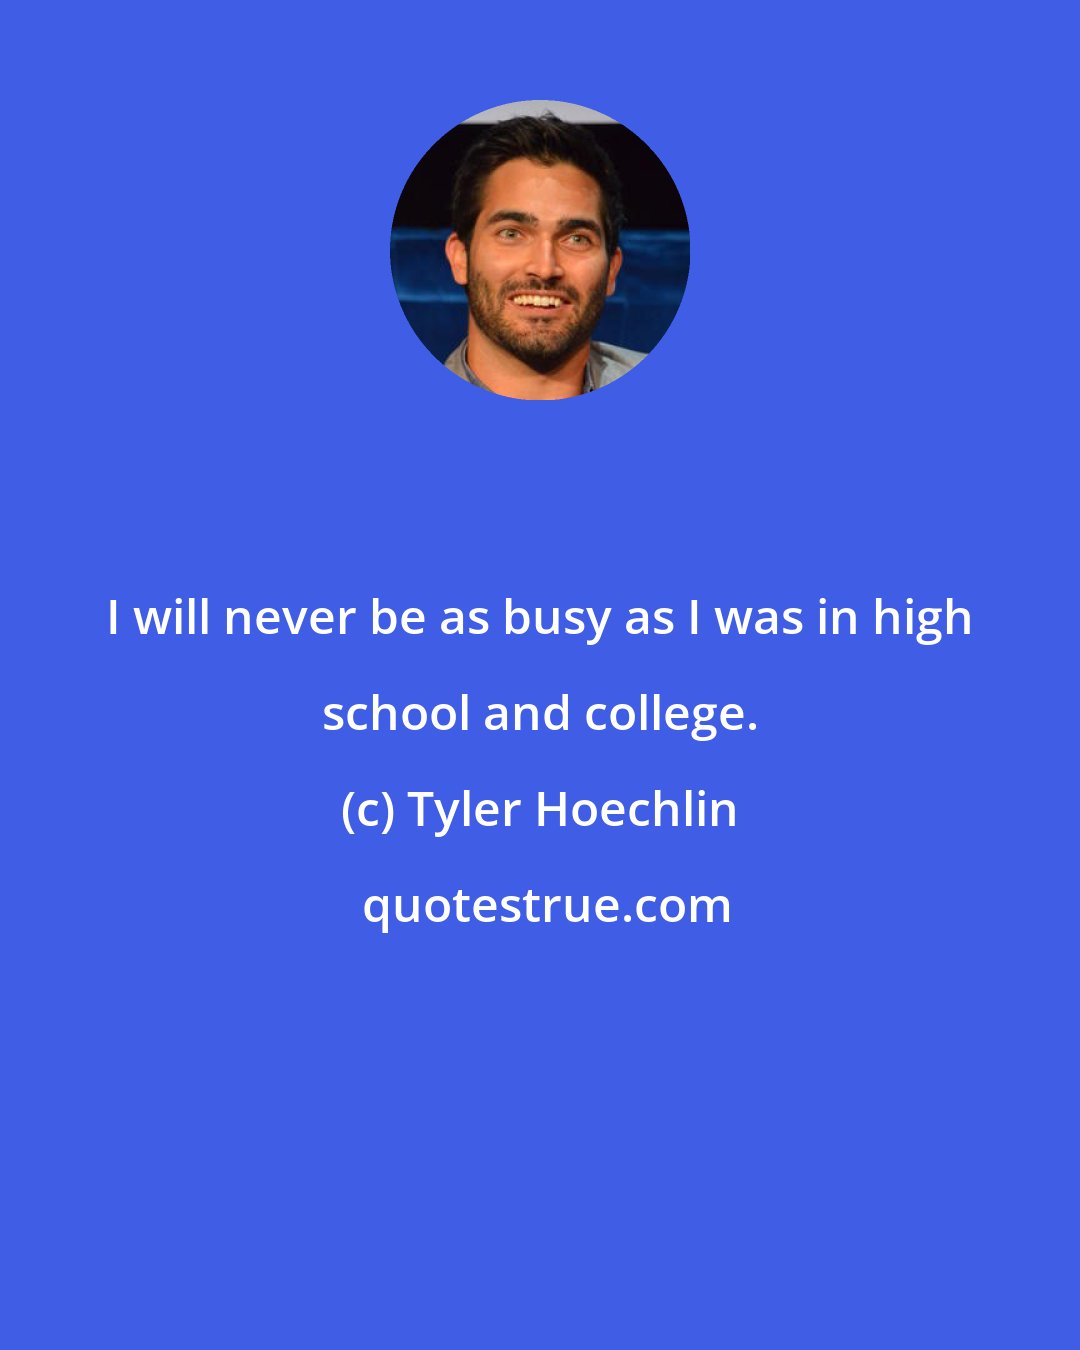 Tyler Hoechlin: I will never be as busy as I was in high school and college.